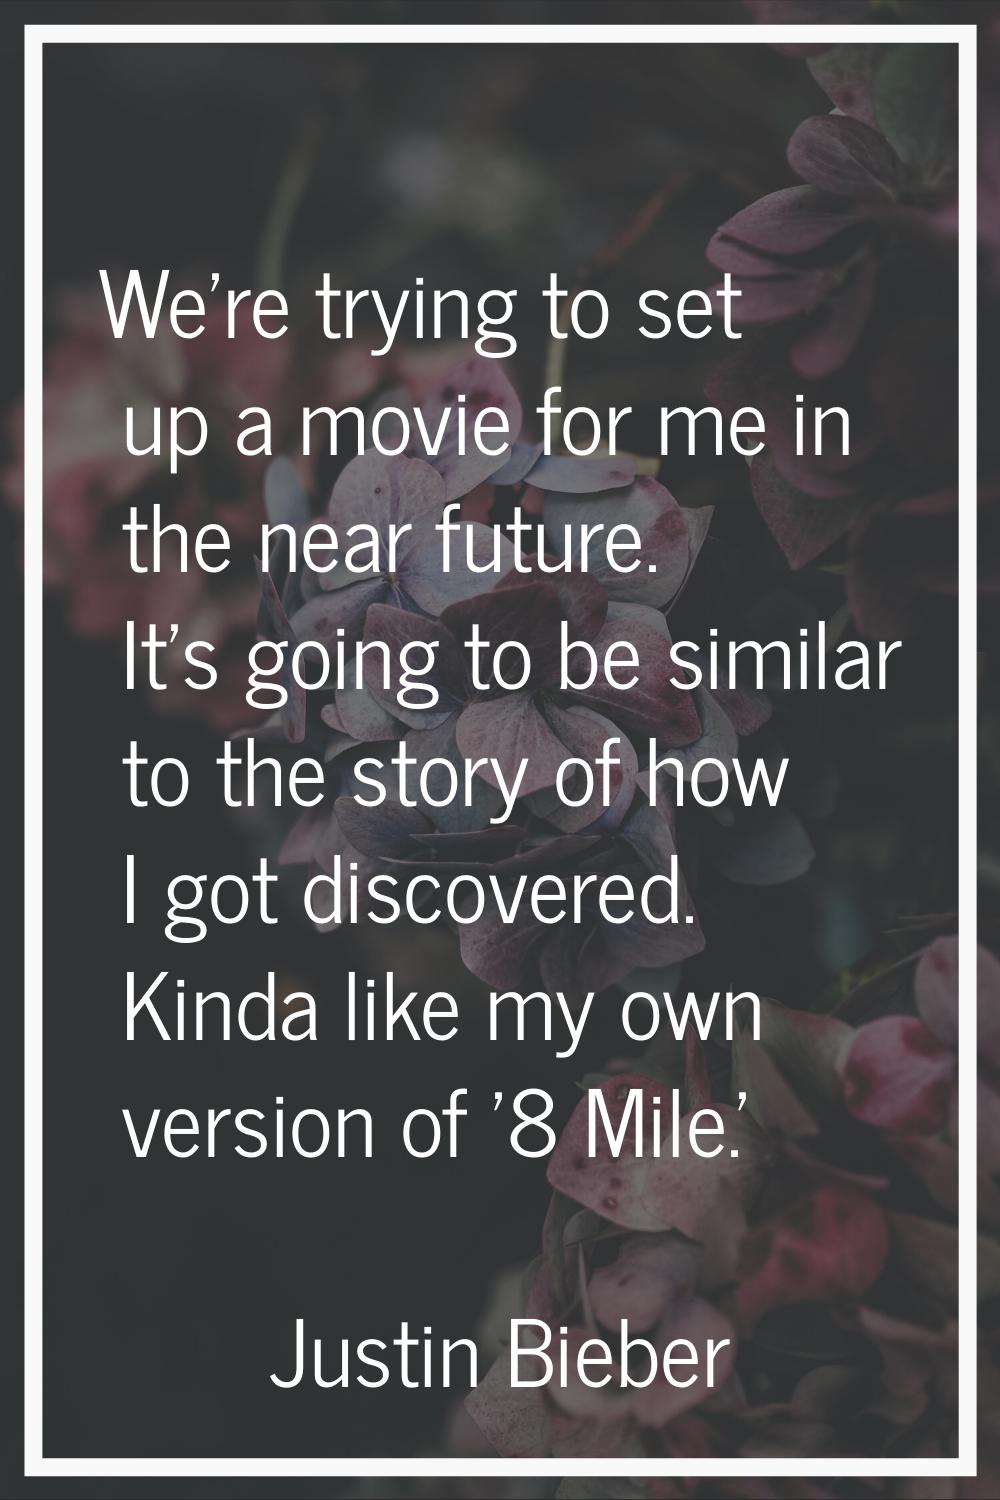 We're trying to set up a movie for me in the near future. It's going to be similar to the story of 